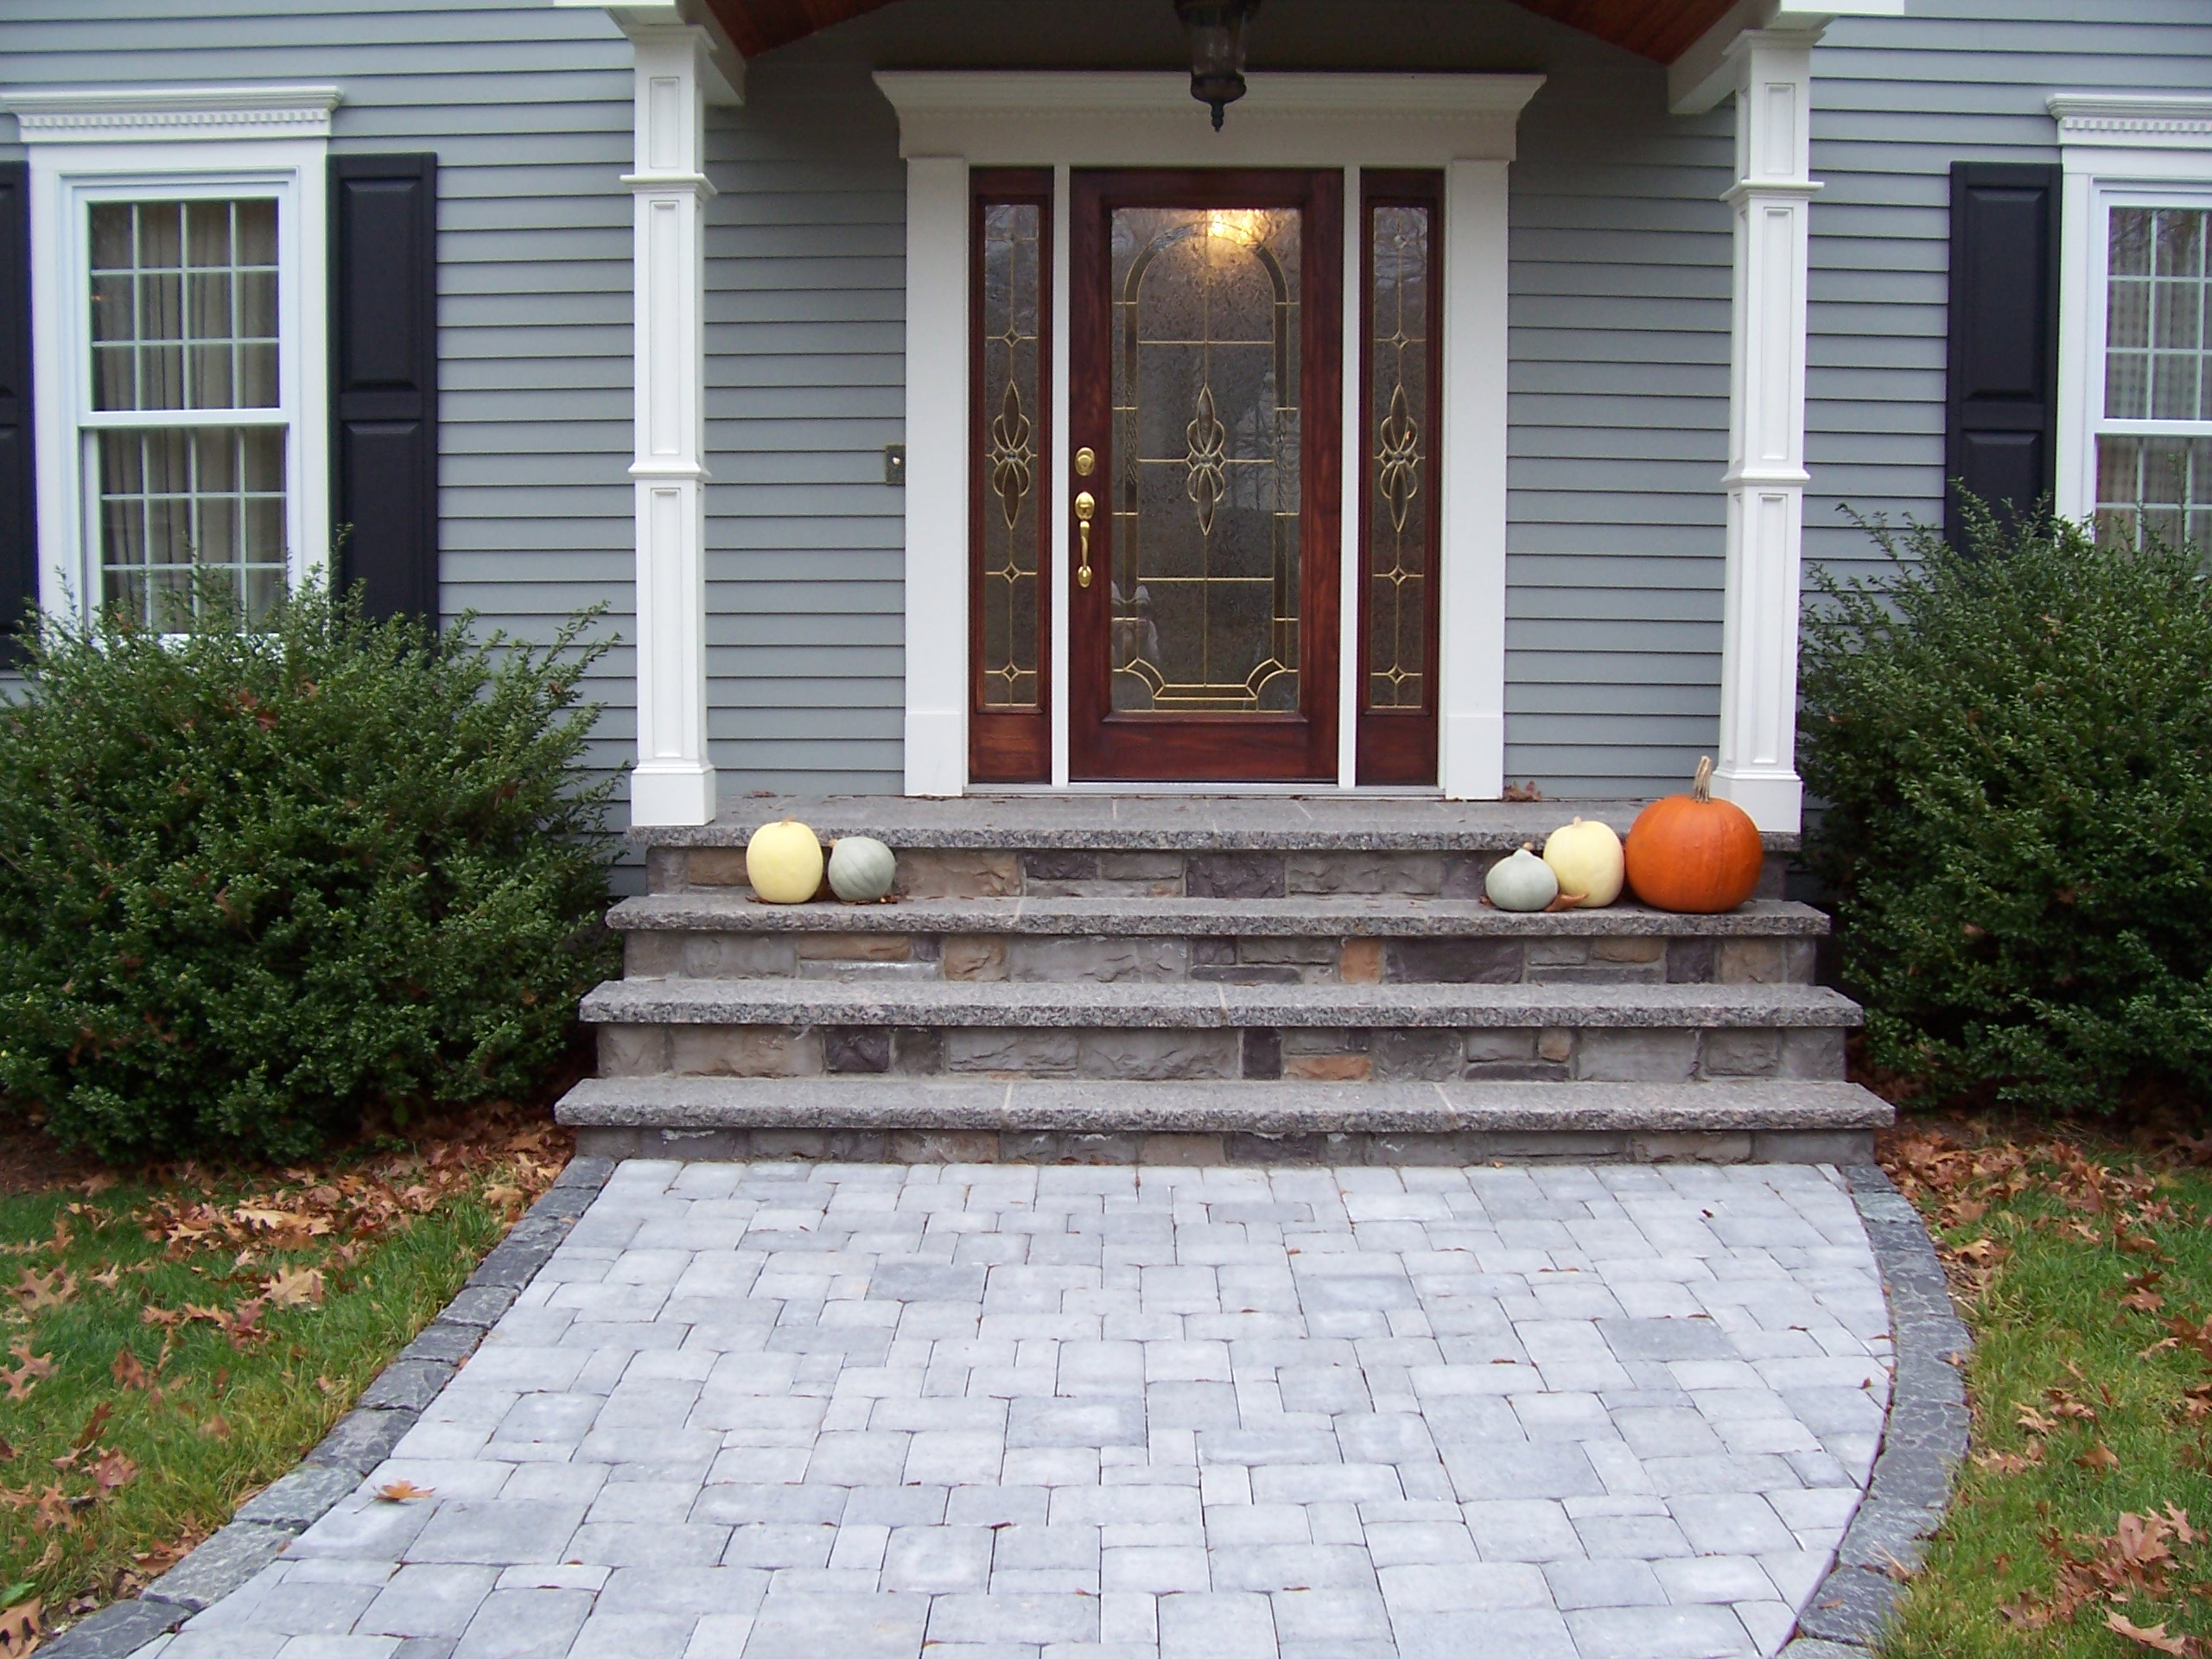 Reclaimed granite pavers and cobblestone edging were used in this ...